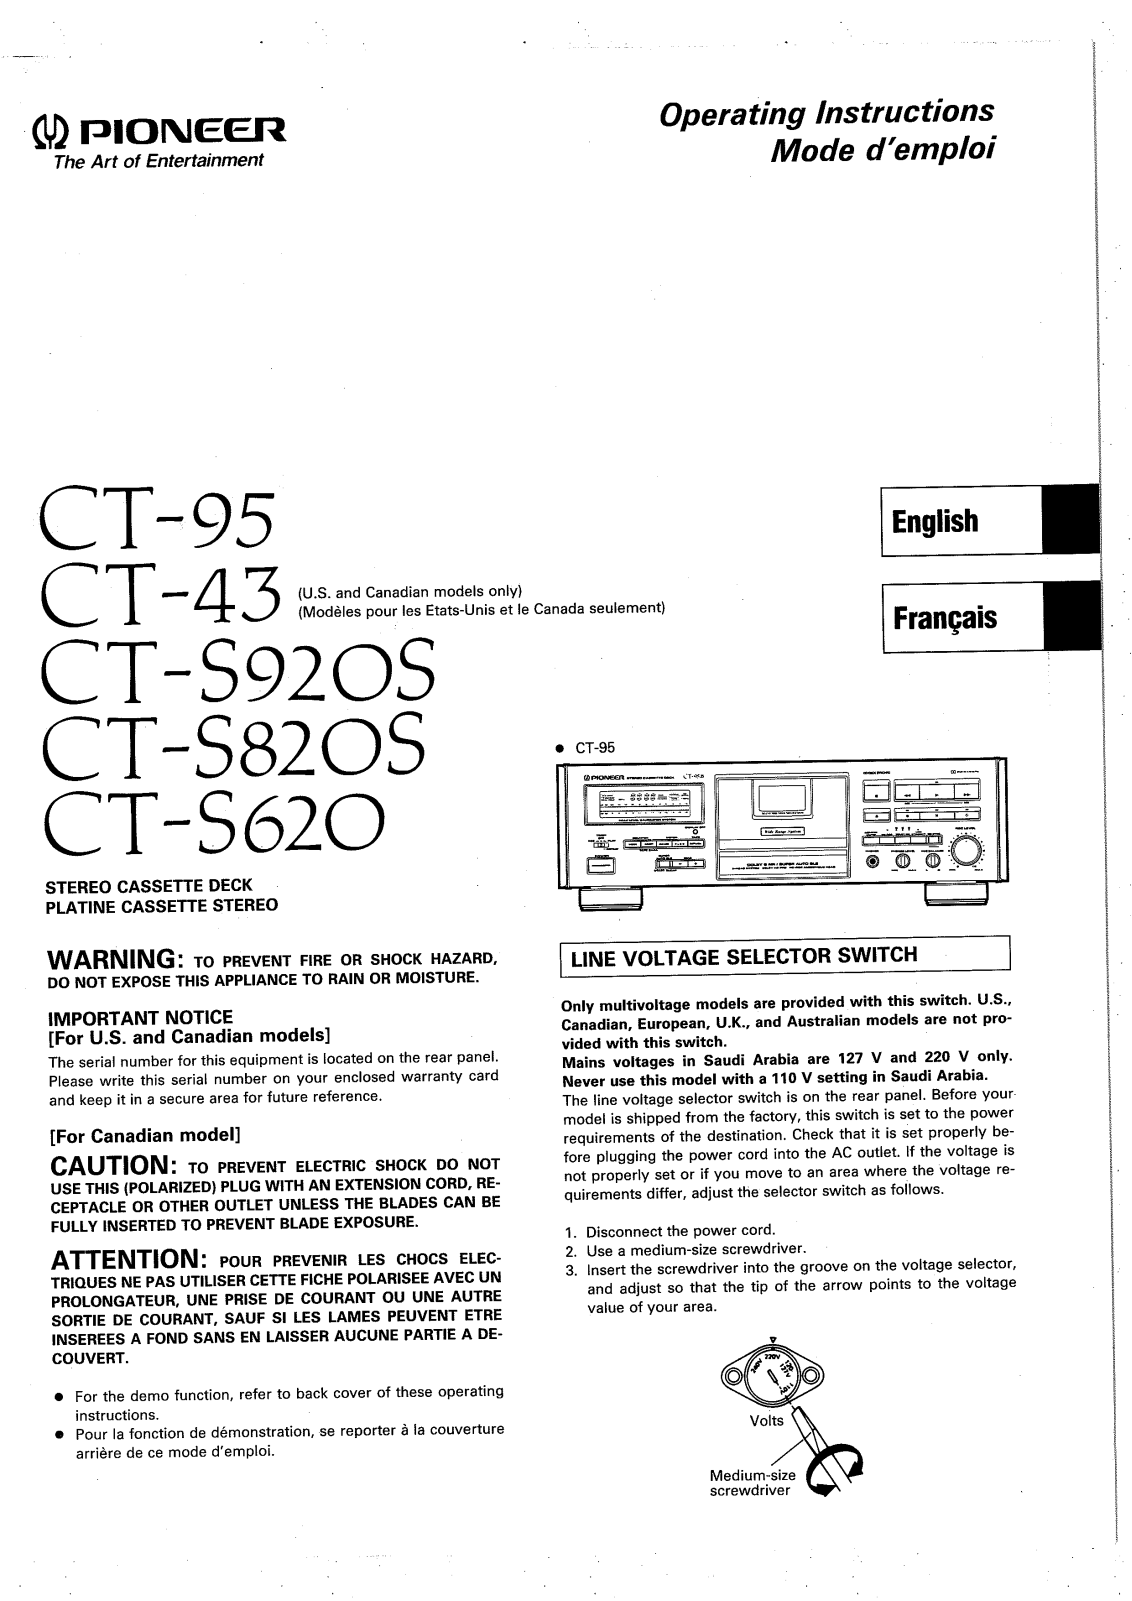 Pioneer CT-43, CT-95, CTS-620, CTS-820-S, CTS-920 Owners manual